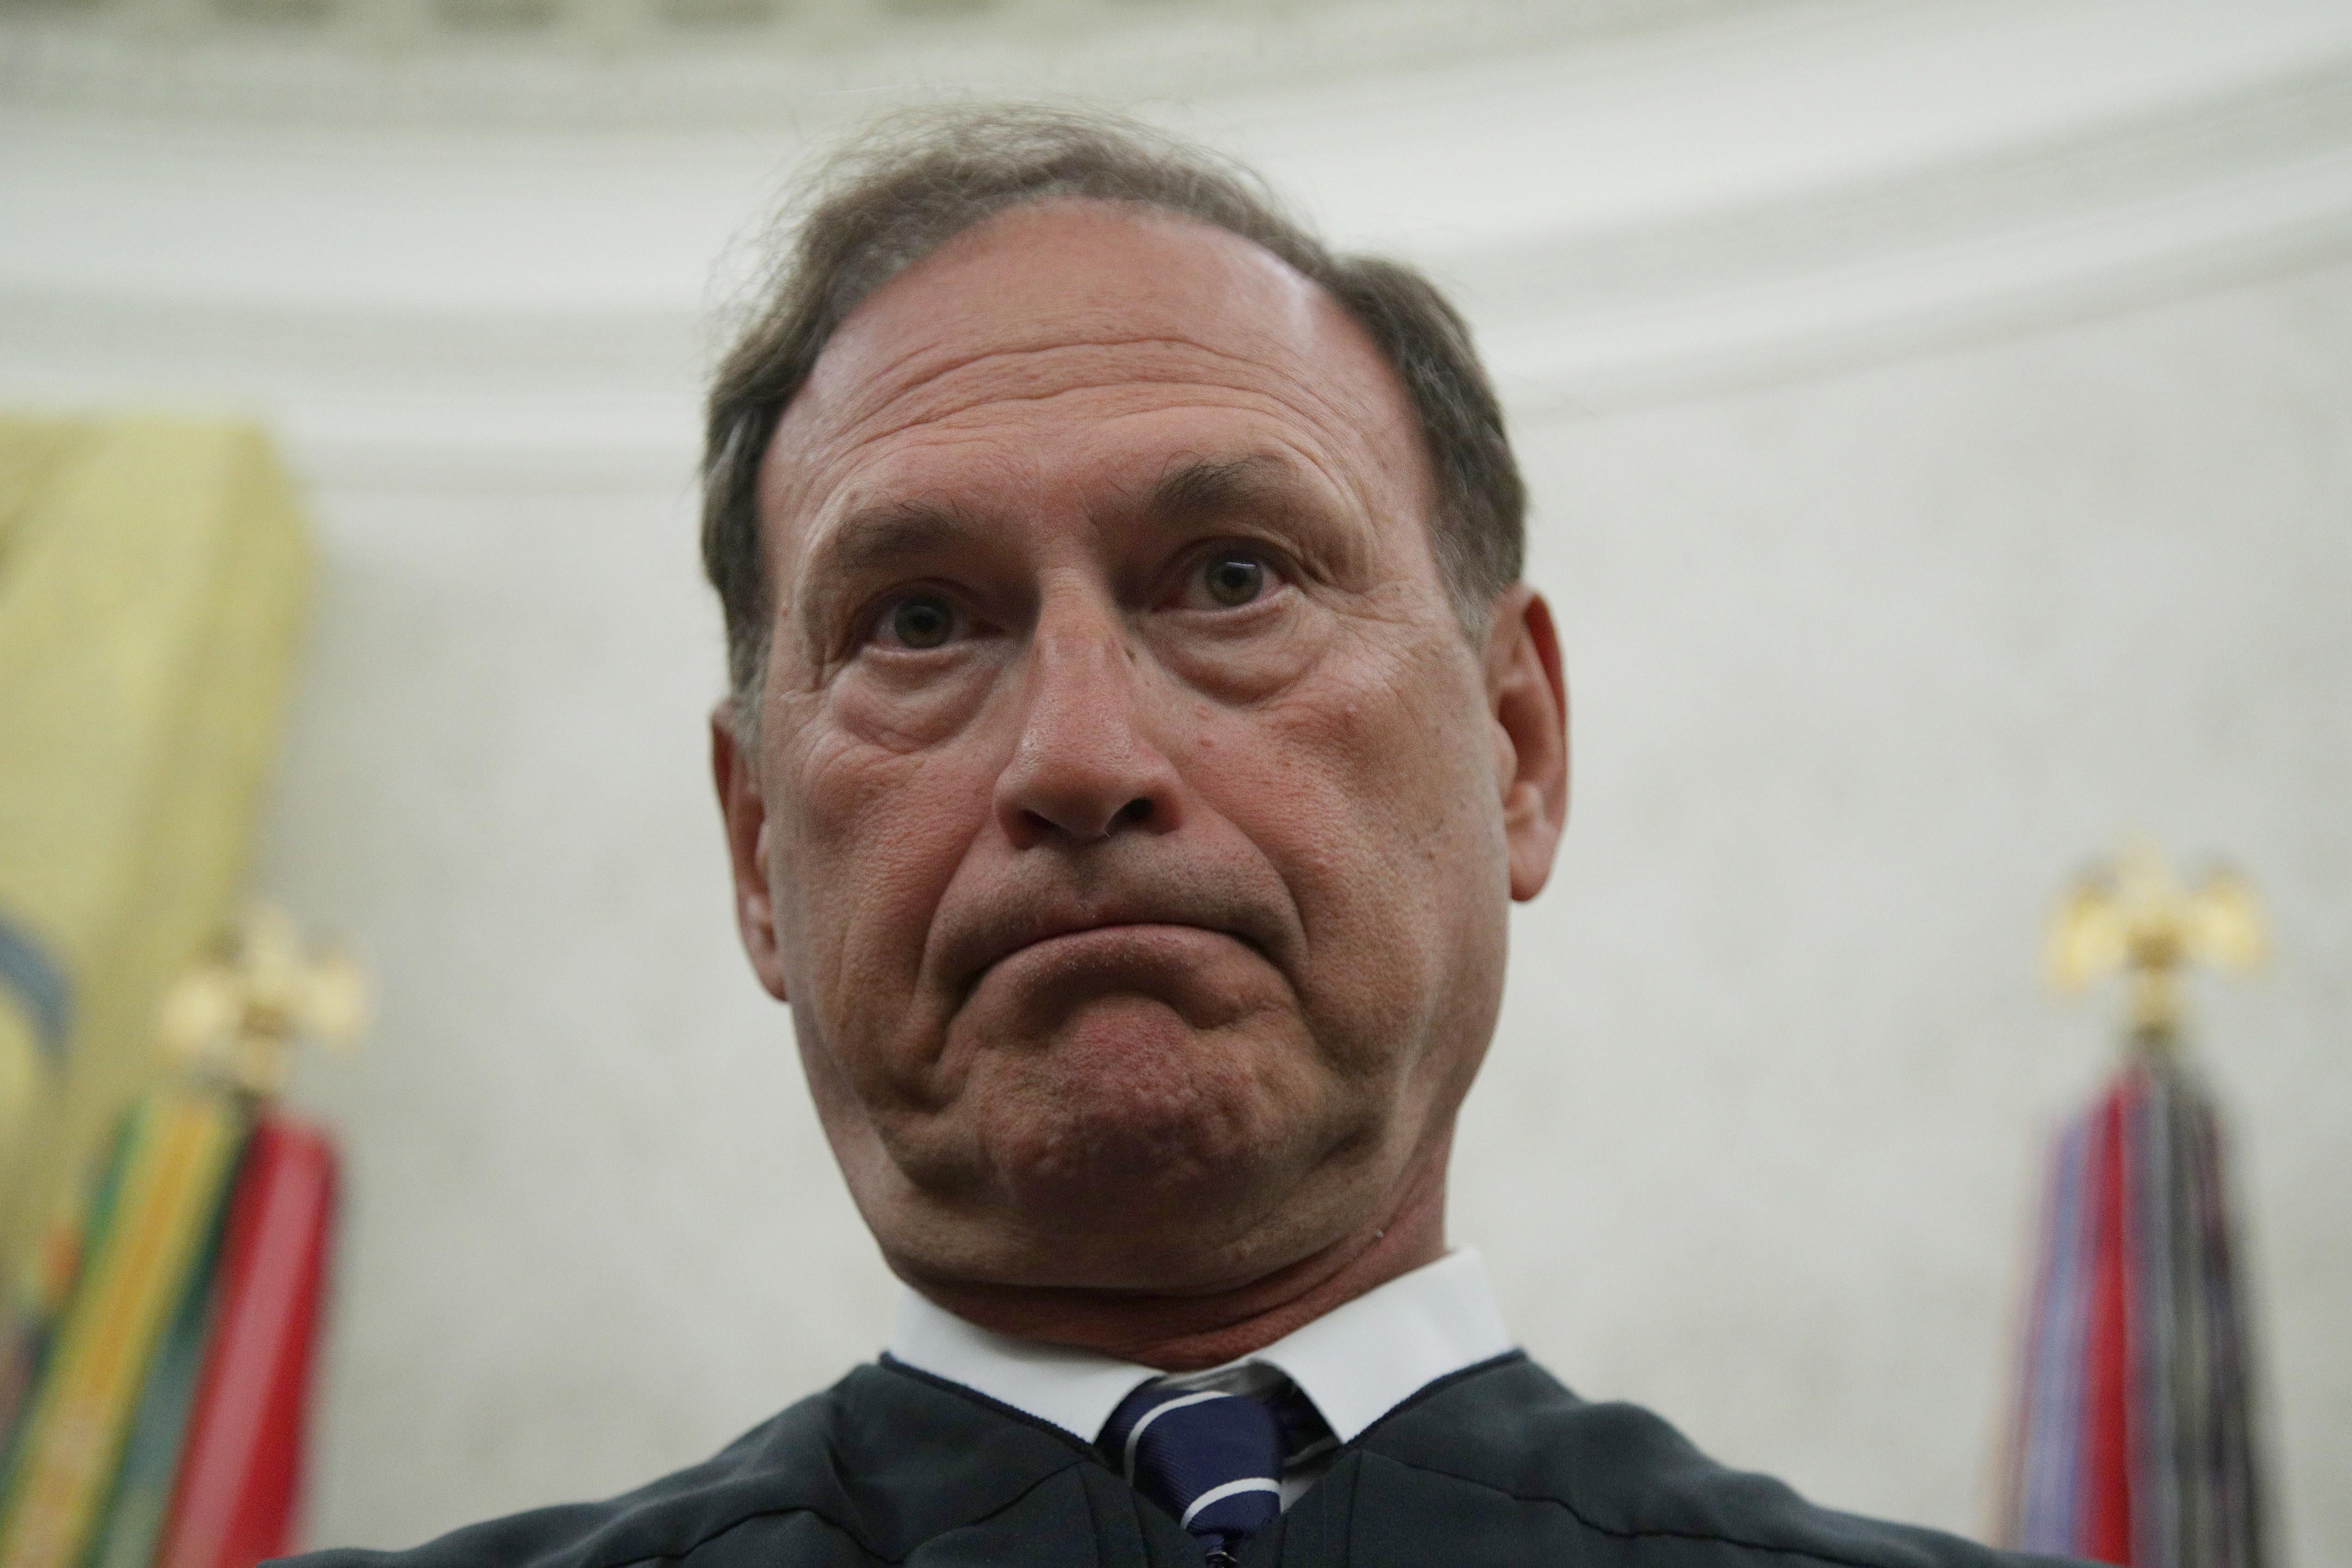 Alito staring ahead, frowning